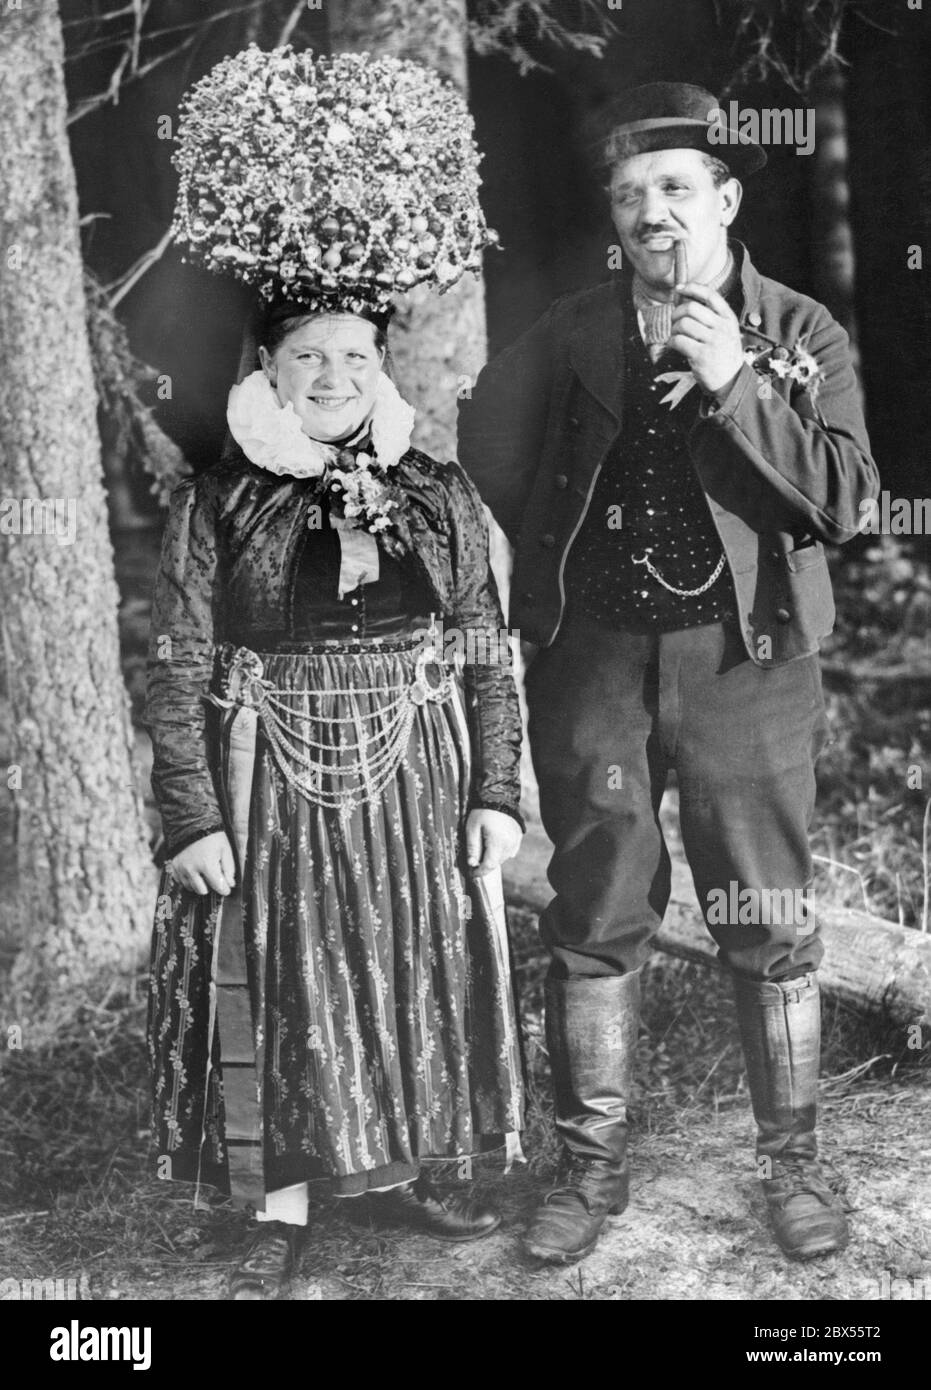 A bridal couple from the Black Forest wear the typical festive folk costume of the region for their wedding. The bride wears a dress and the Schaeppelkrone (bridal crown), a headdress elaborately decorated with glass balls. The man wears leather boots and a vest. Stock Photo